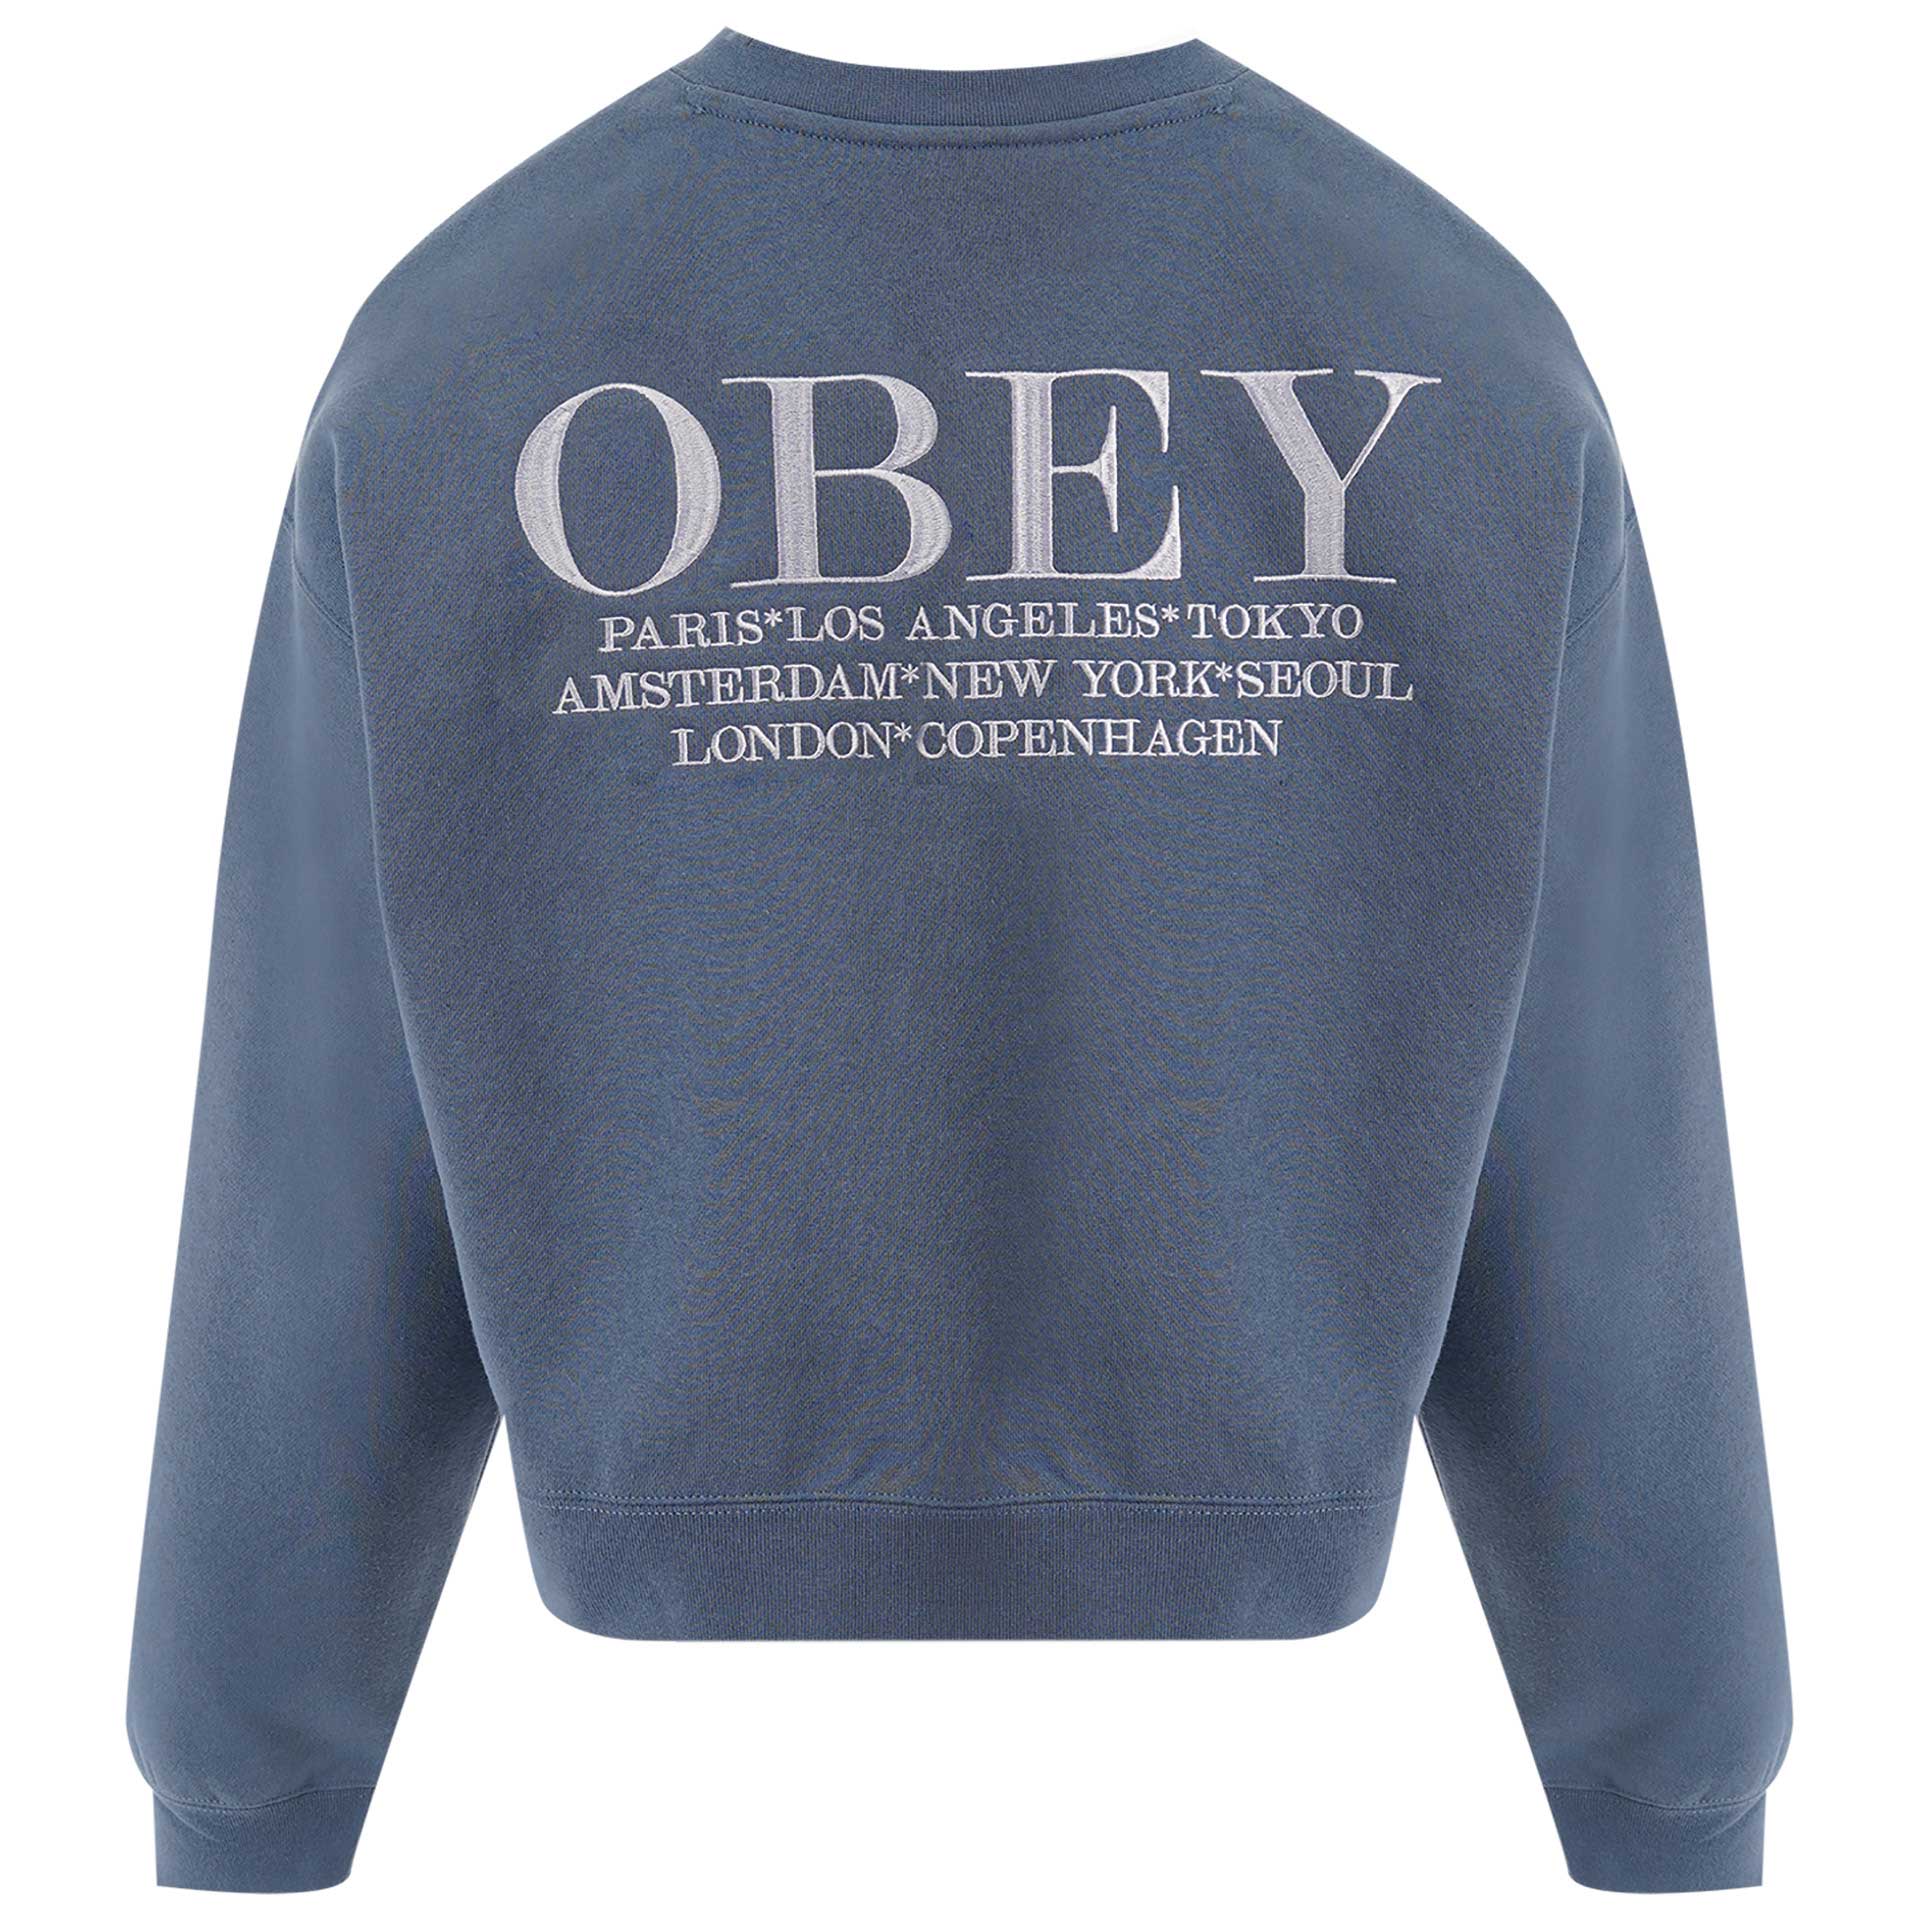 Obey Clothing Sweater 2